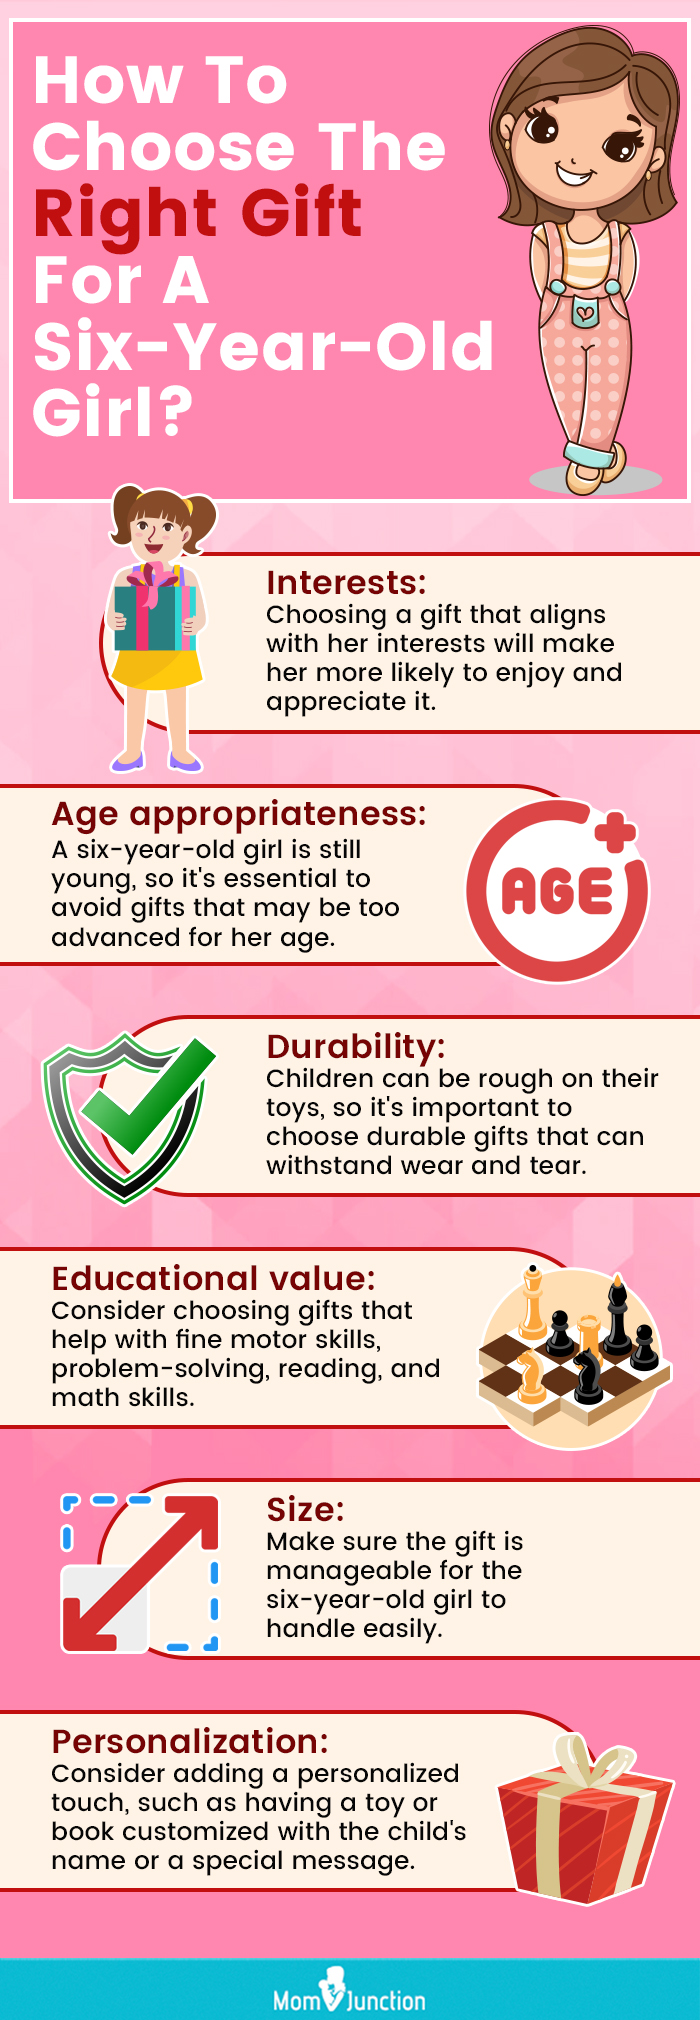 How To Choose The Right Gift For A Six-Year-Old Girl (infographic)